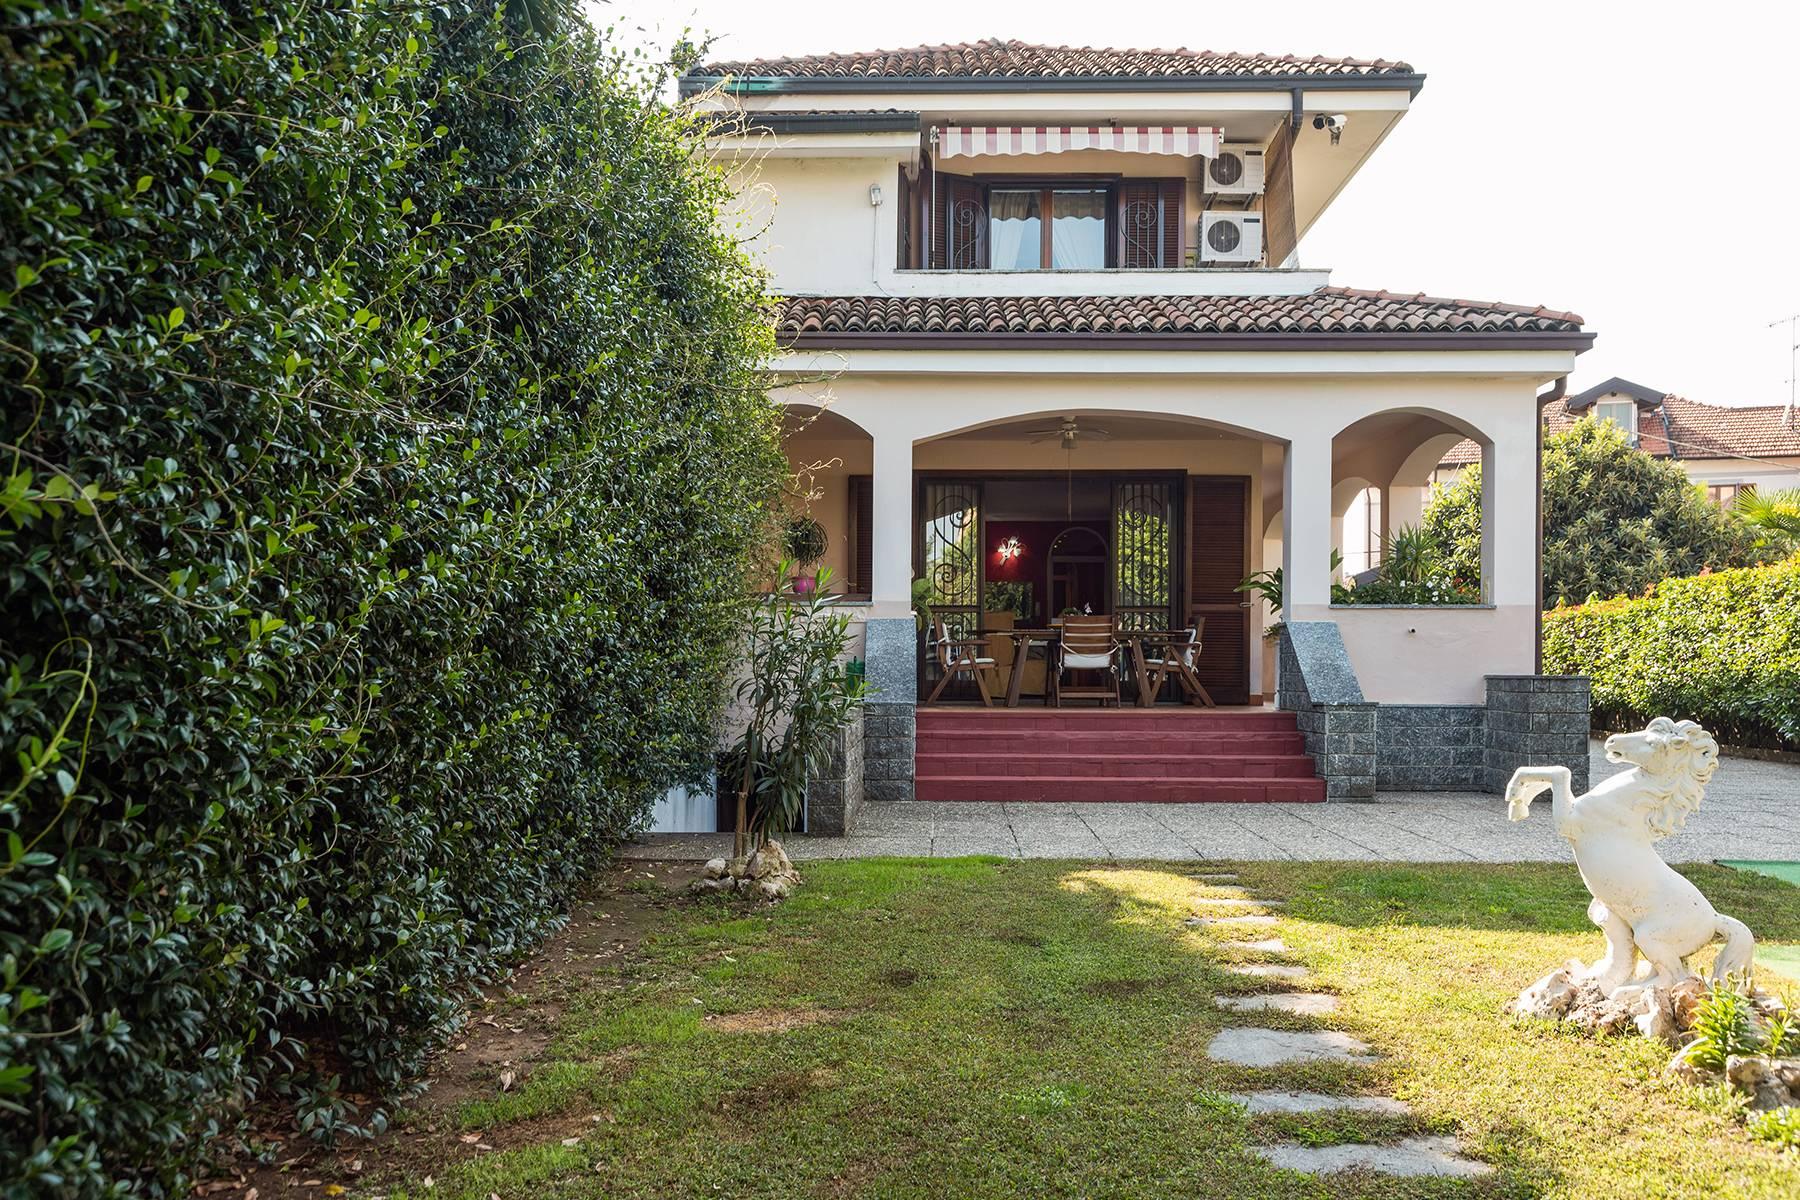 Independent villa a few steps from the heart of Arona - 1